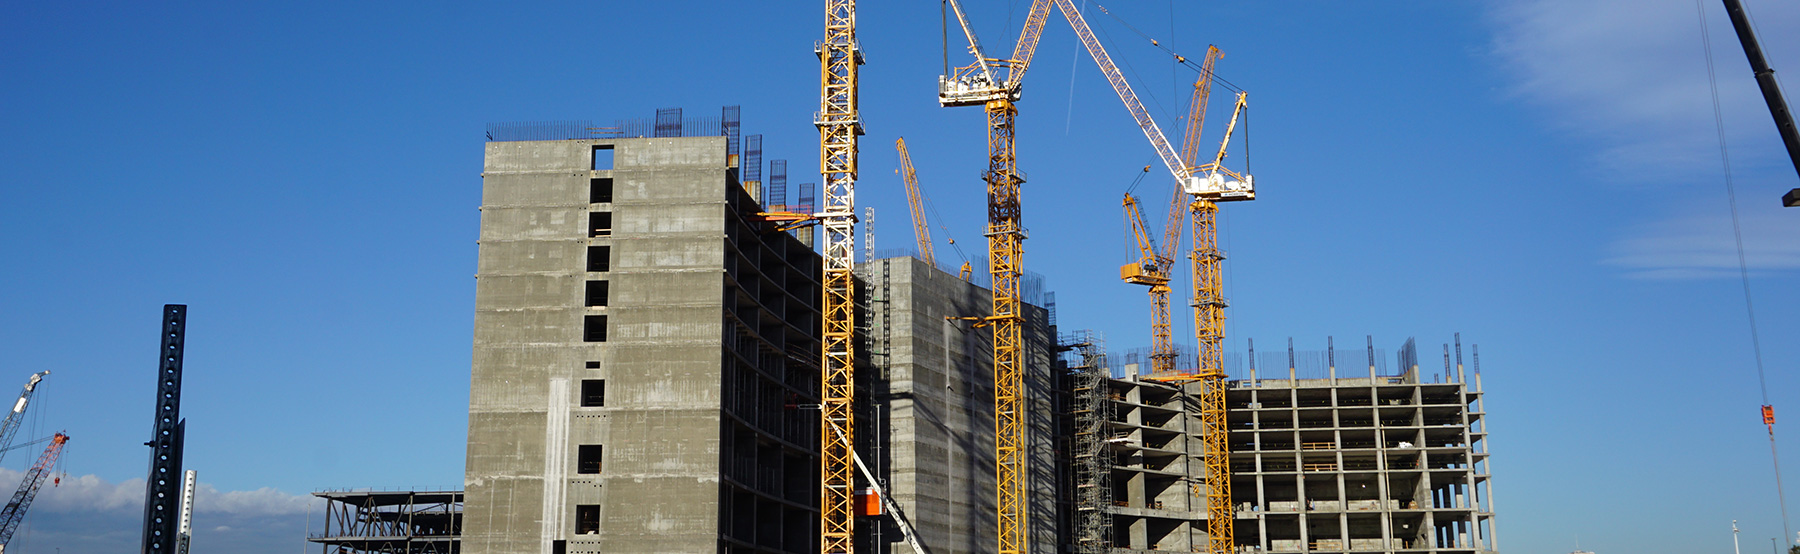 Commercial Construction with Cranes